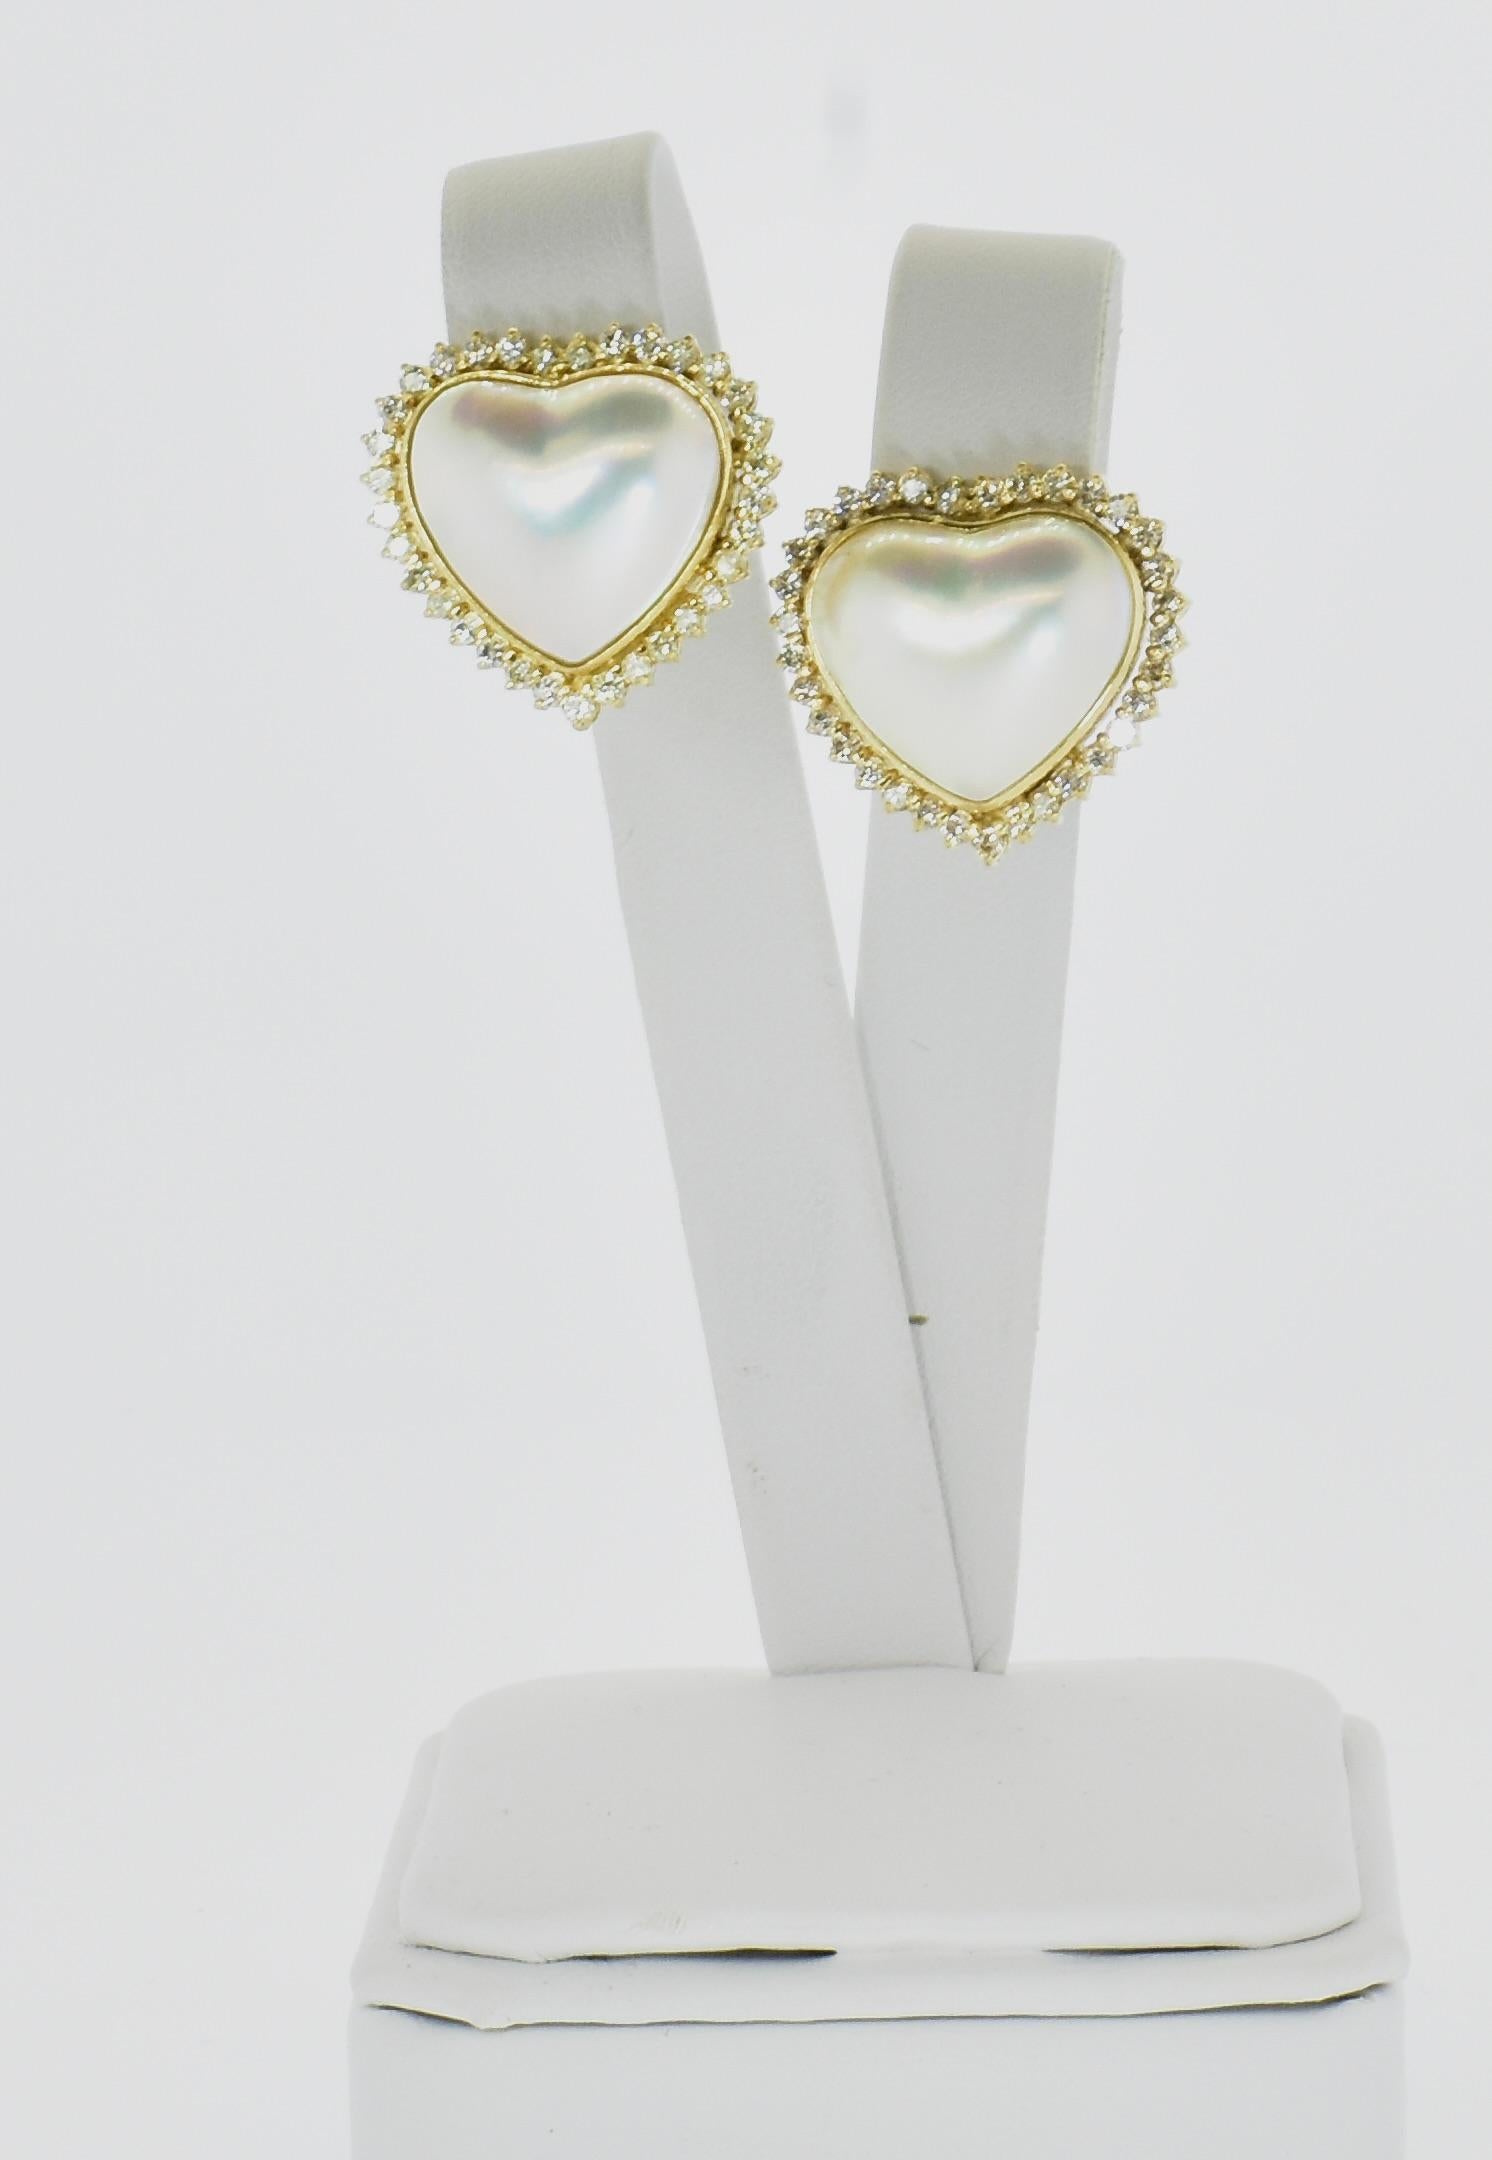 Bead Yellow Gold, Mabe Fancy Heart Shaped Pearls and Fine White Diamond Earrings.